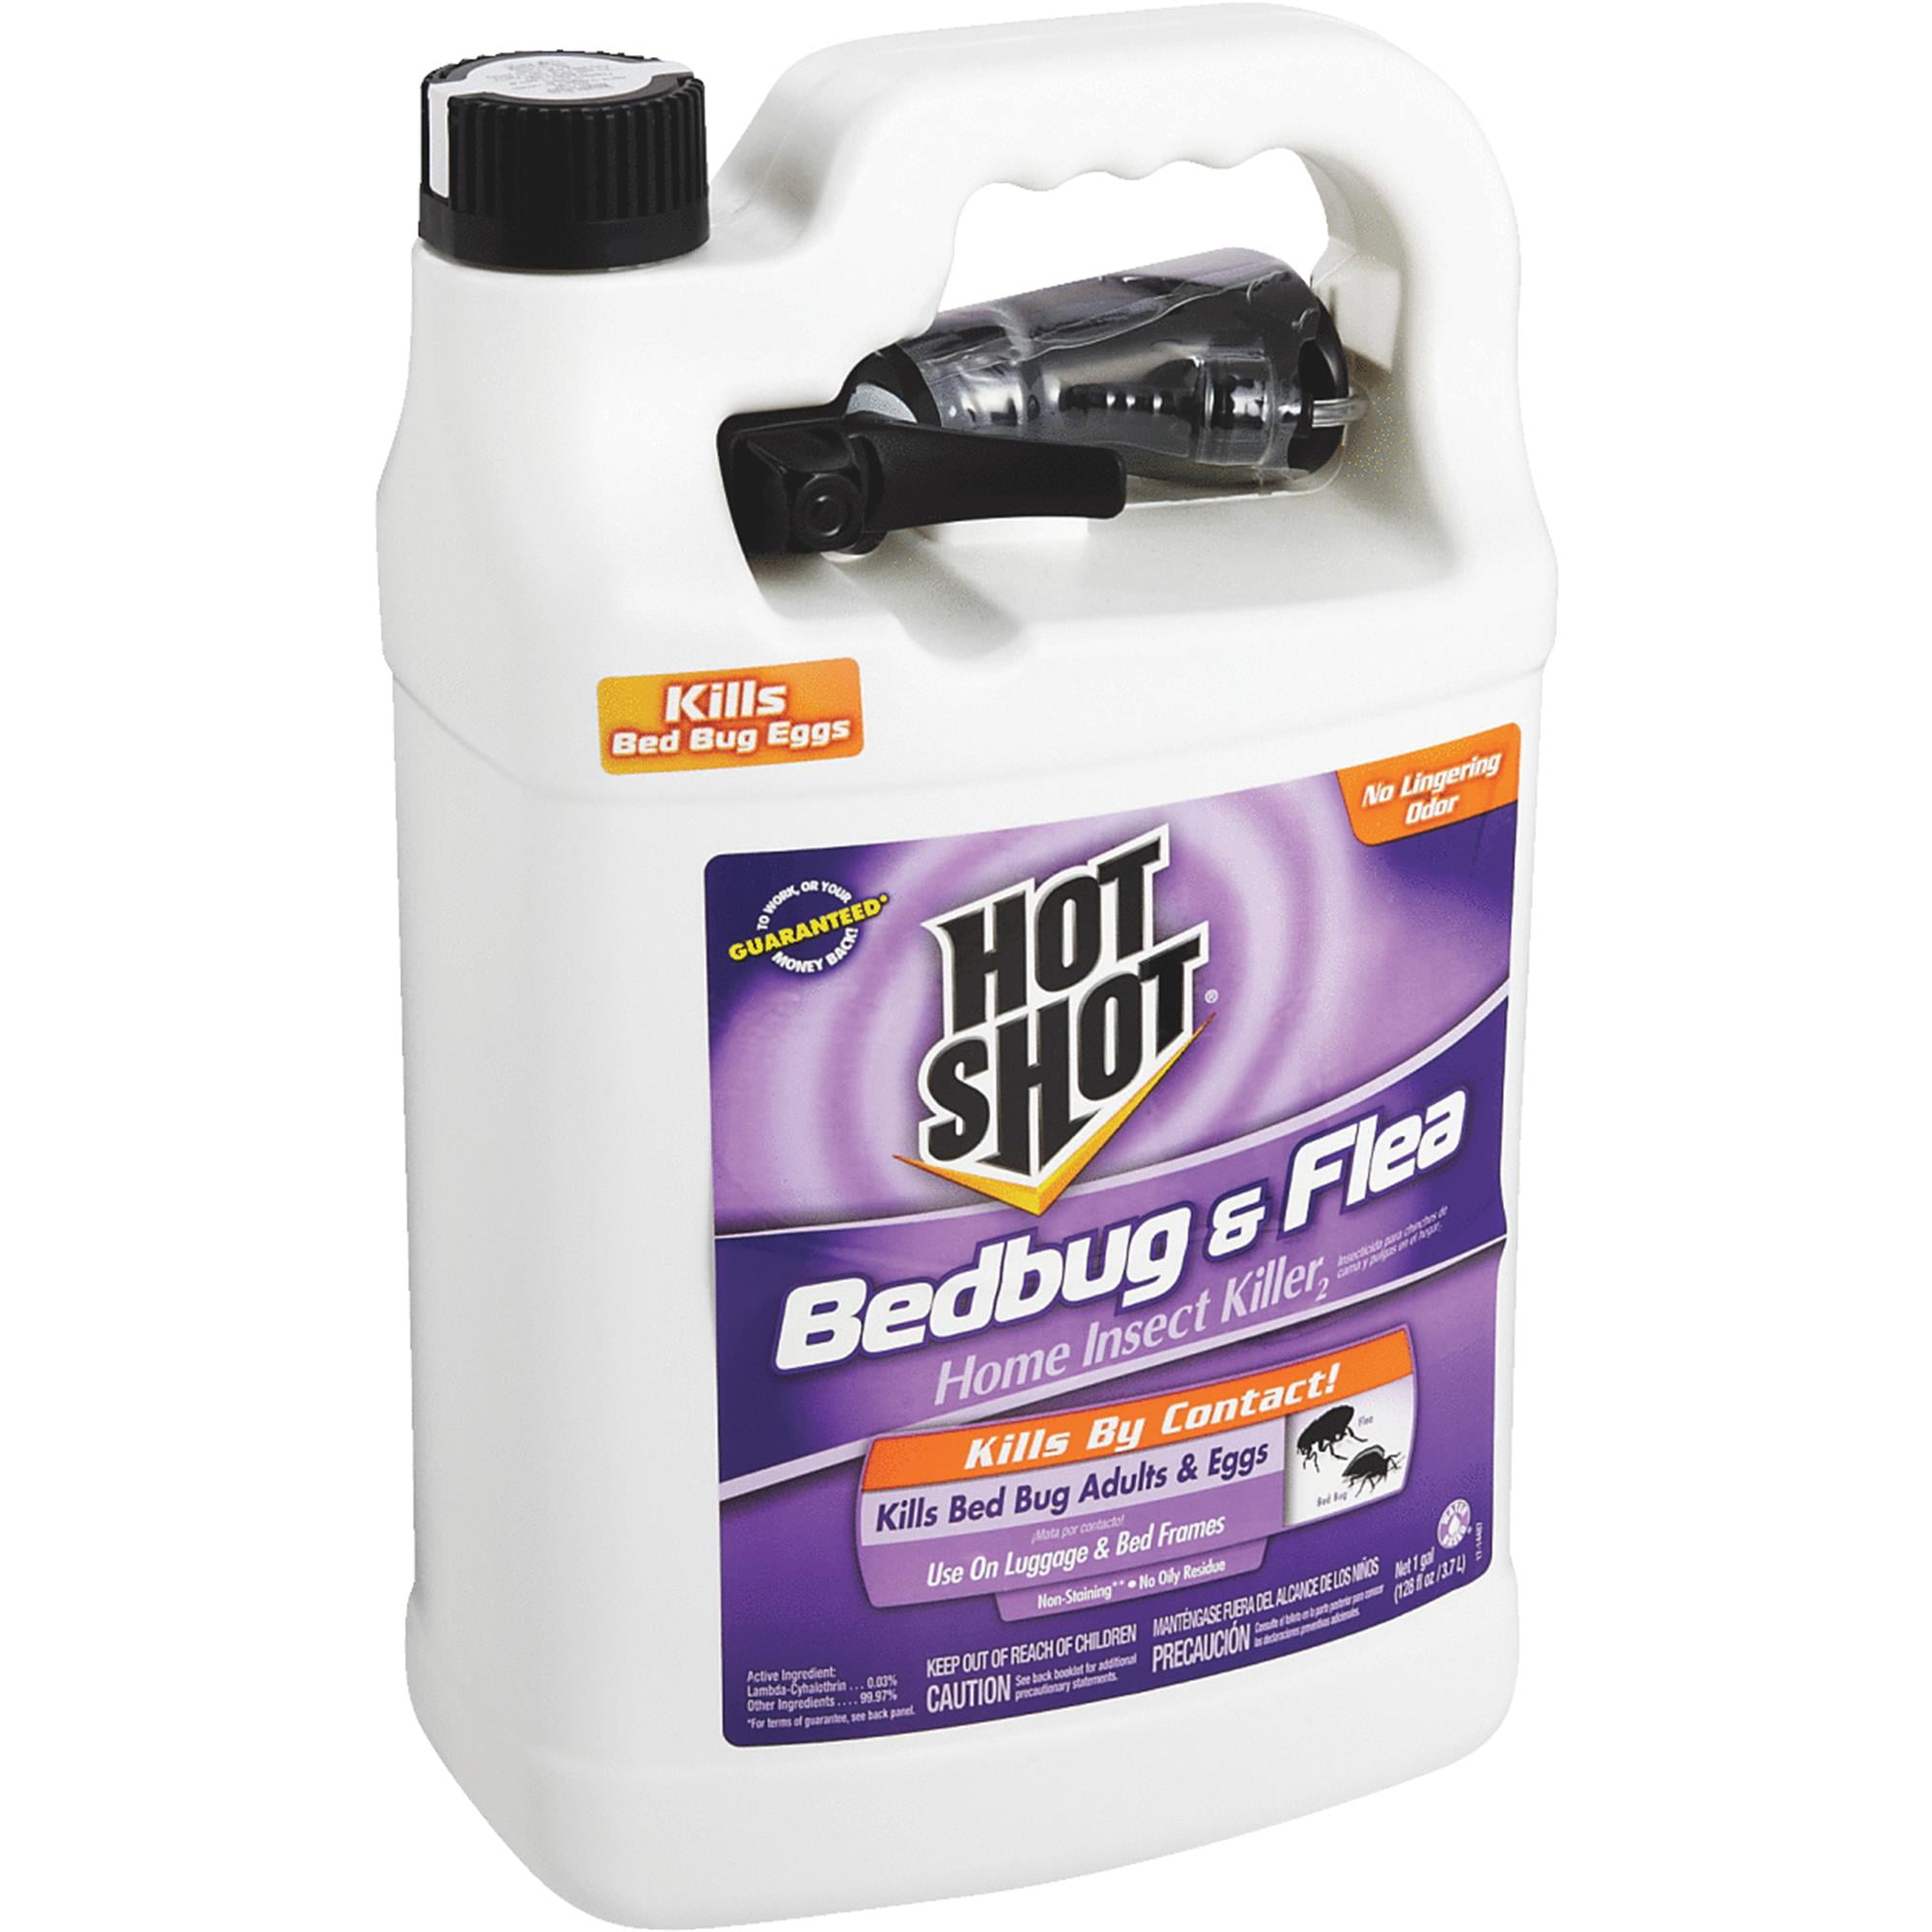 Hot Shot Bed Bug & Flea Home Insect Killer kills bed bugs and bed bug e...